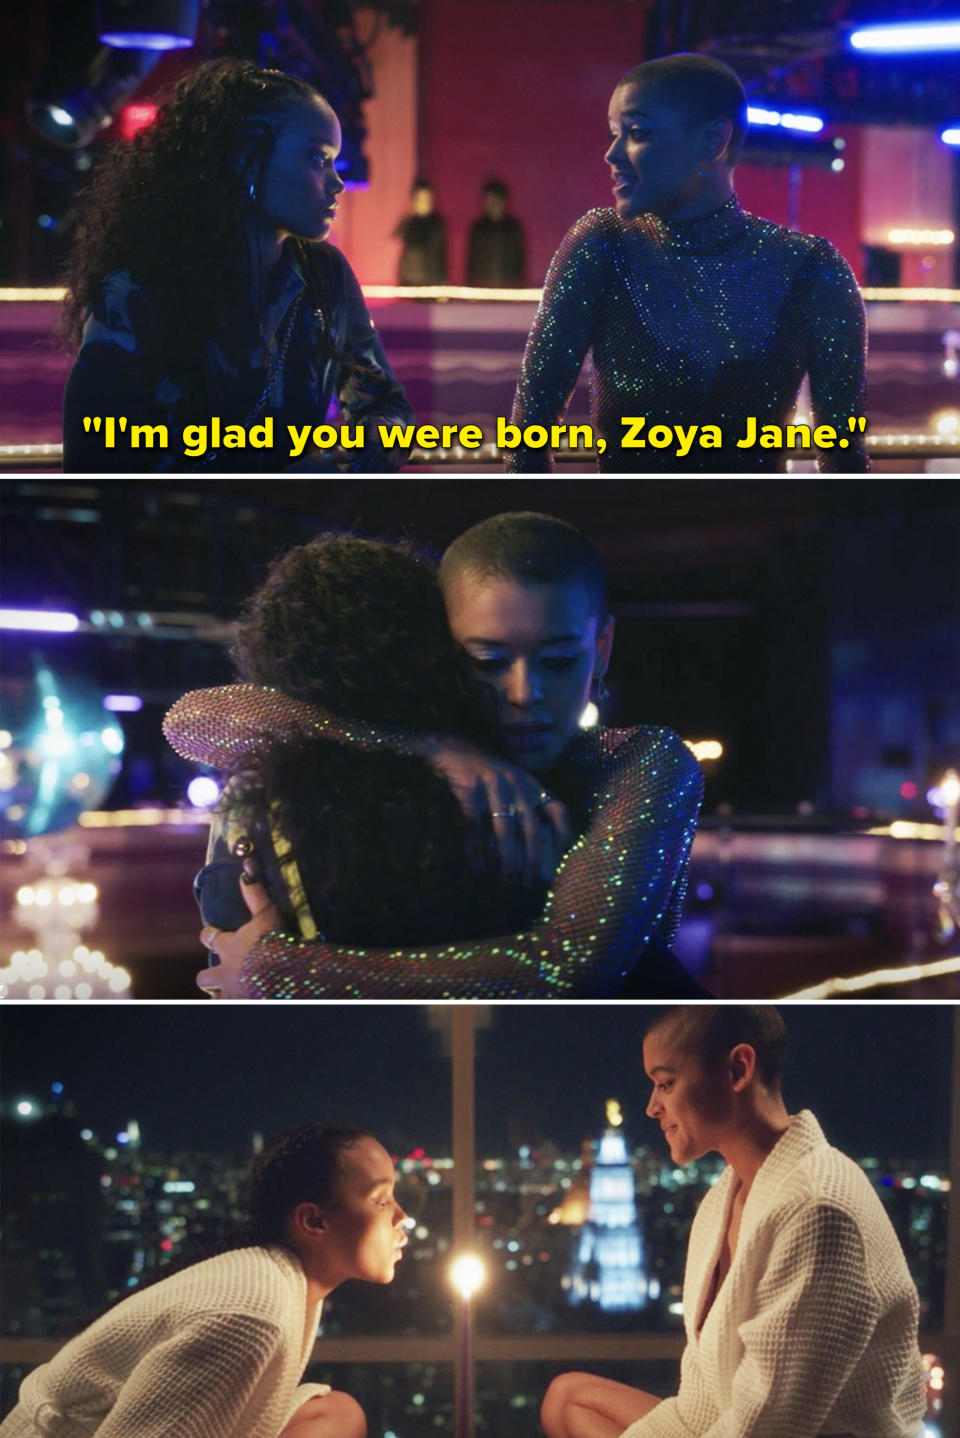 Julien telling Zoya, "I'm glad you were born, Zoya Jane" and the two of them hugging